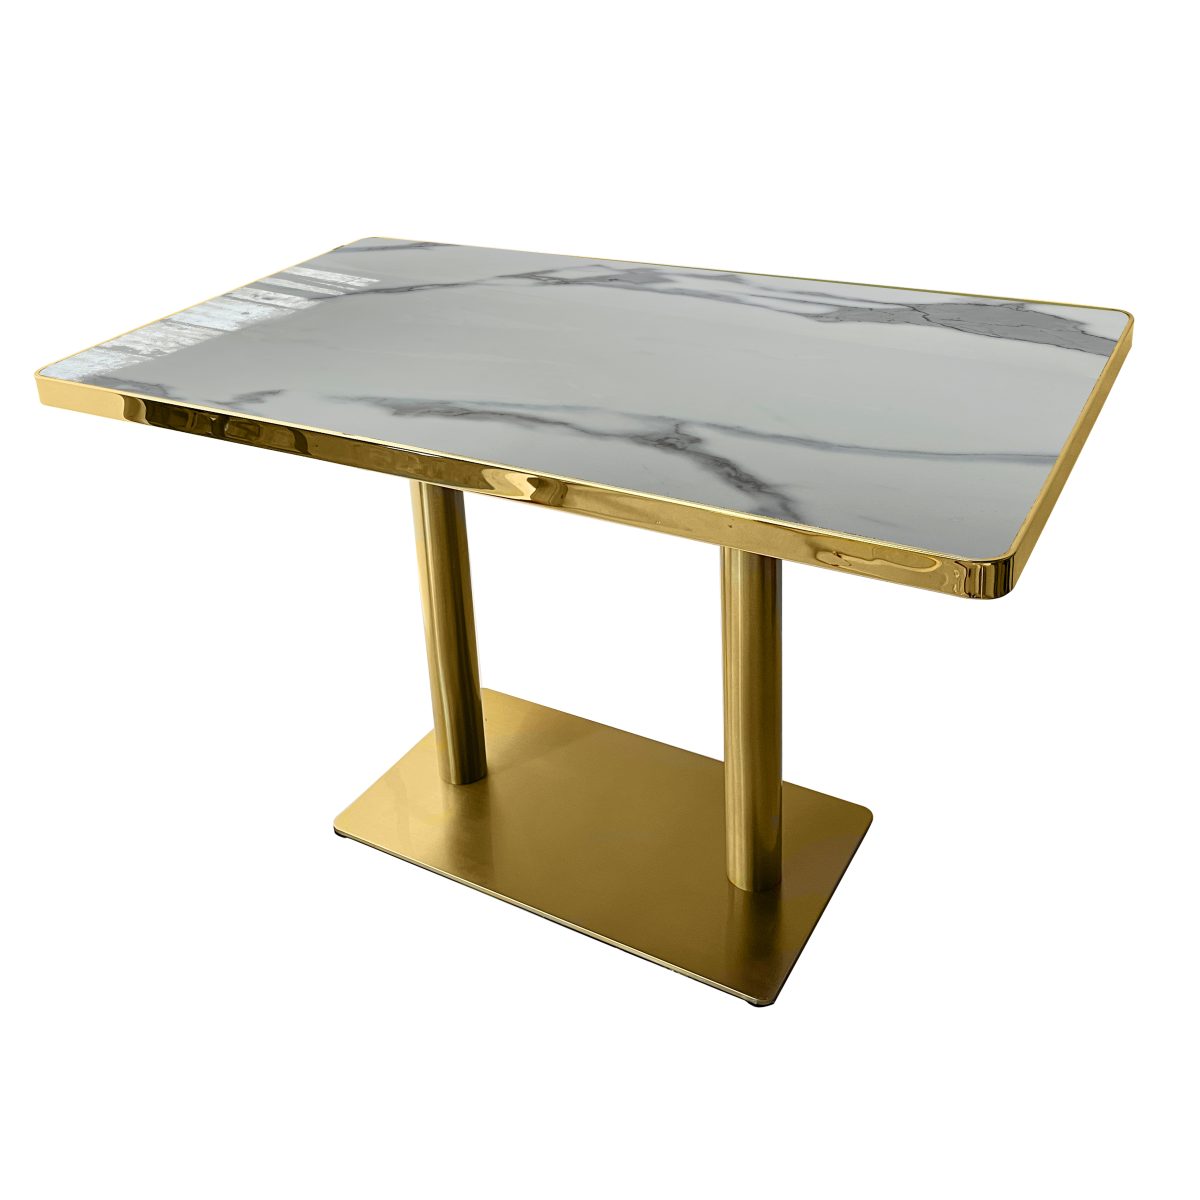 White Tabletop With Gold Cast Iron Legs